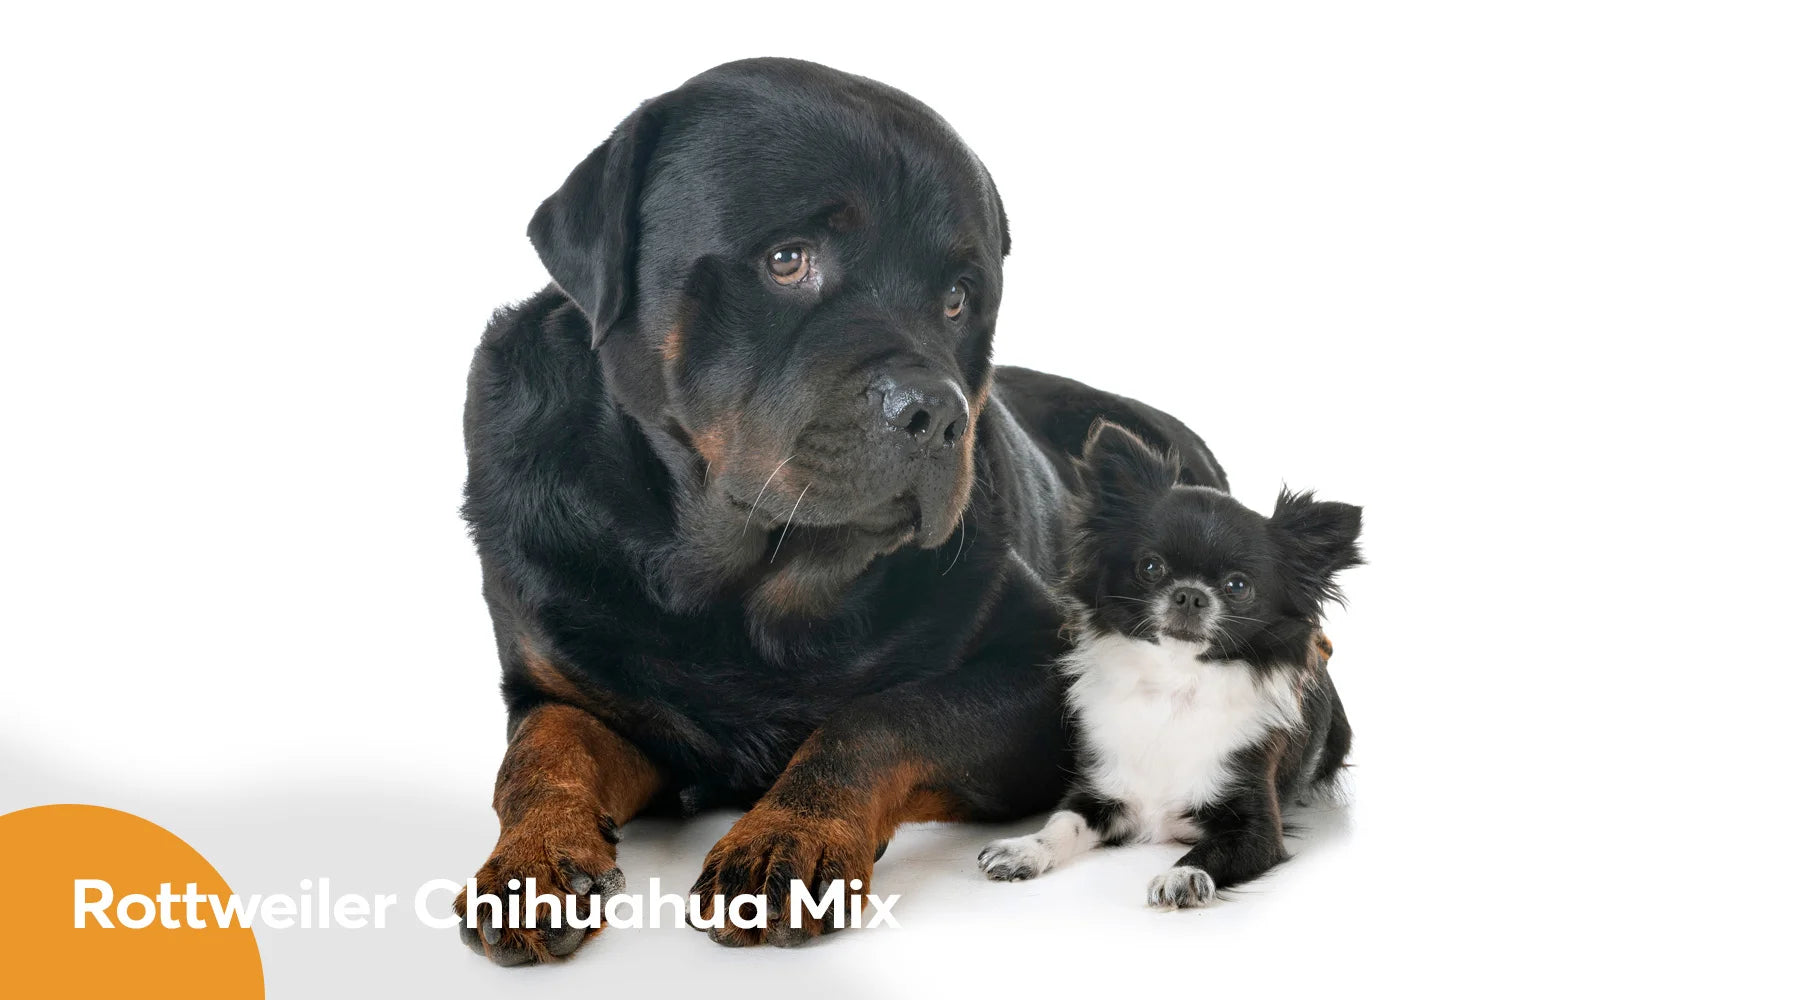 Rottweiler Chihuahua Mix: An Odd and Lovable Mixed Dog Breed